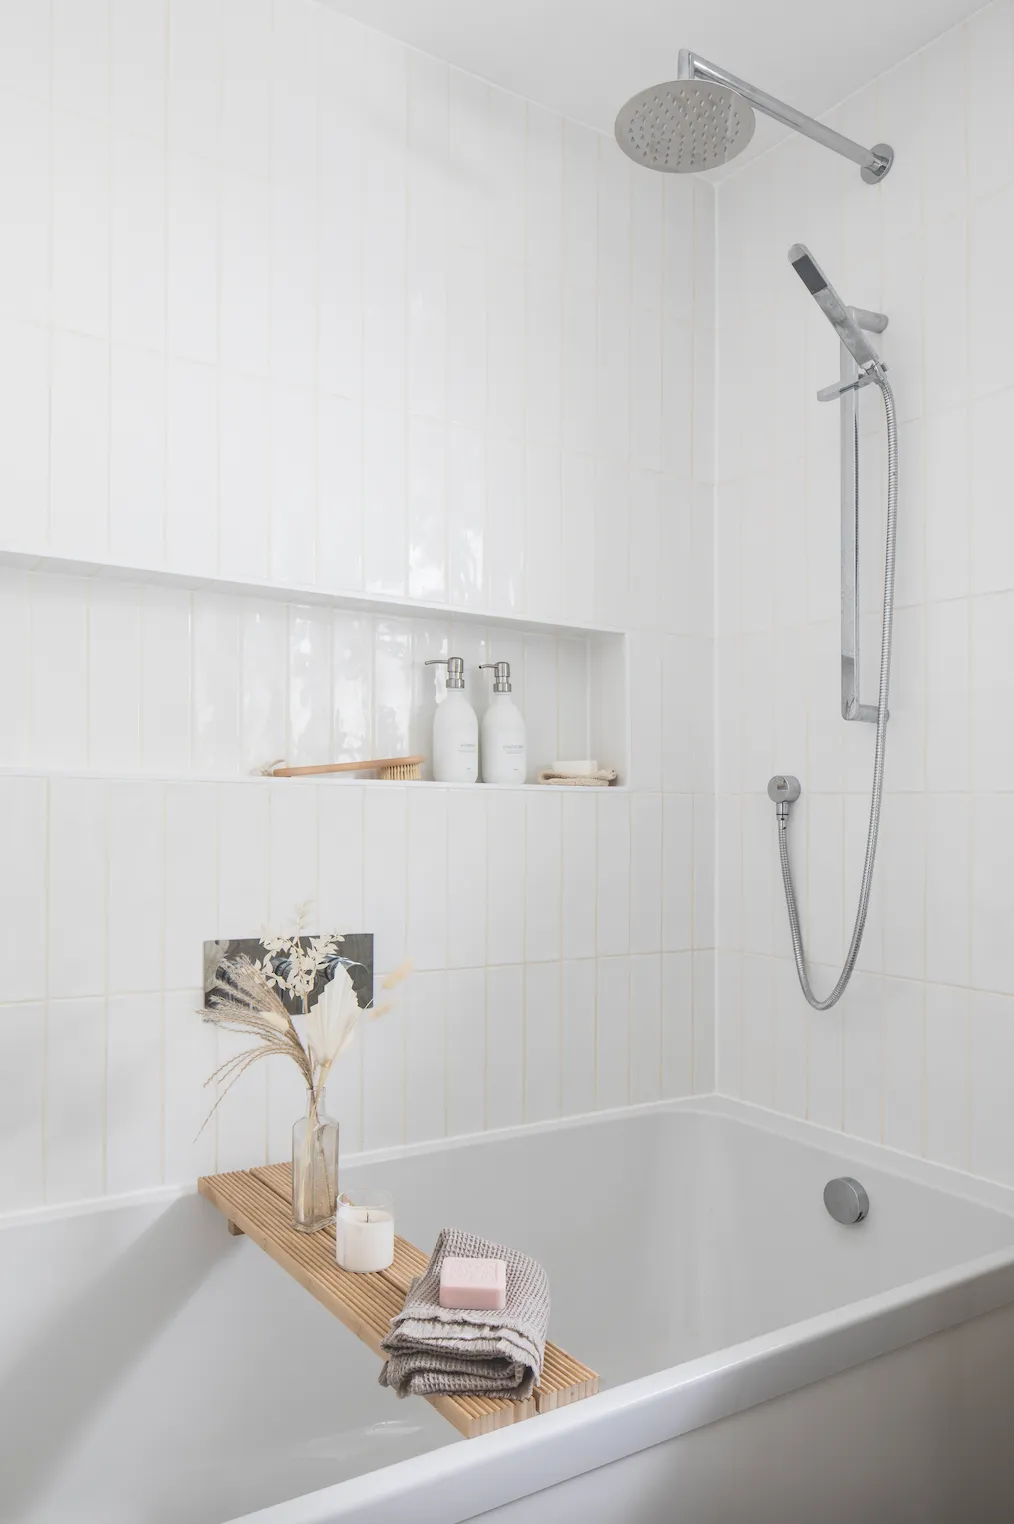 Laying Porcelain Superstore’s glossy white metro tiles vertically, and white marble-effect tiles on the floor, makes the space feel bigger. ‘They’re well-priced and good quality, with enough detail on them so the room doesn’t look flat,’ says Becca